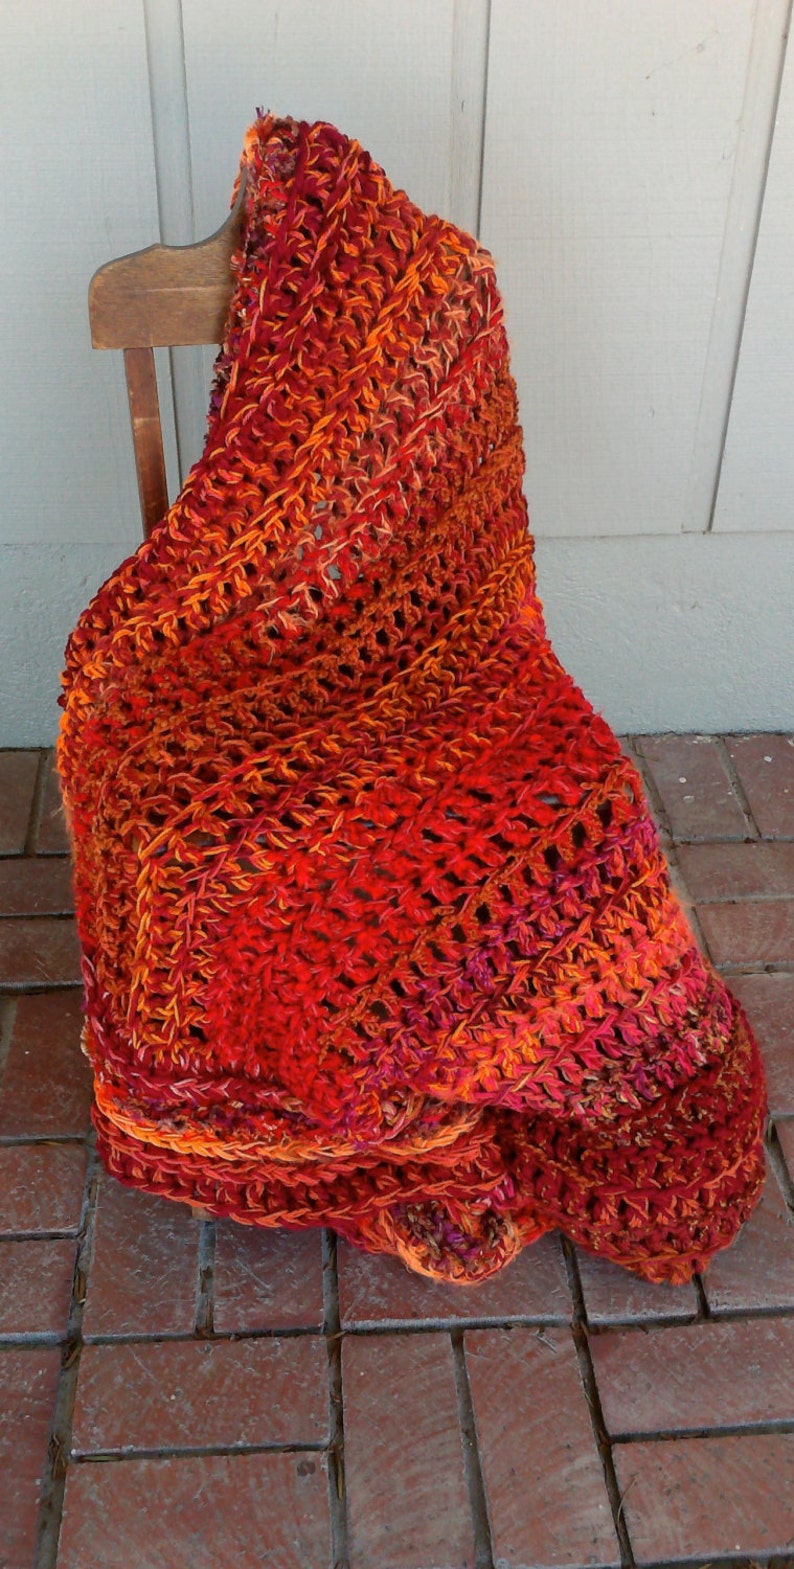 Blanket Crochet Throw Blanket in Fire Colors Red and Orange | Etsy